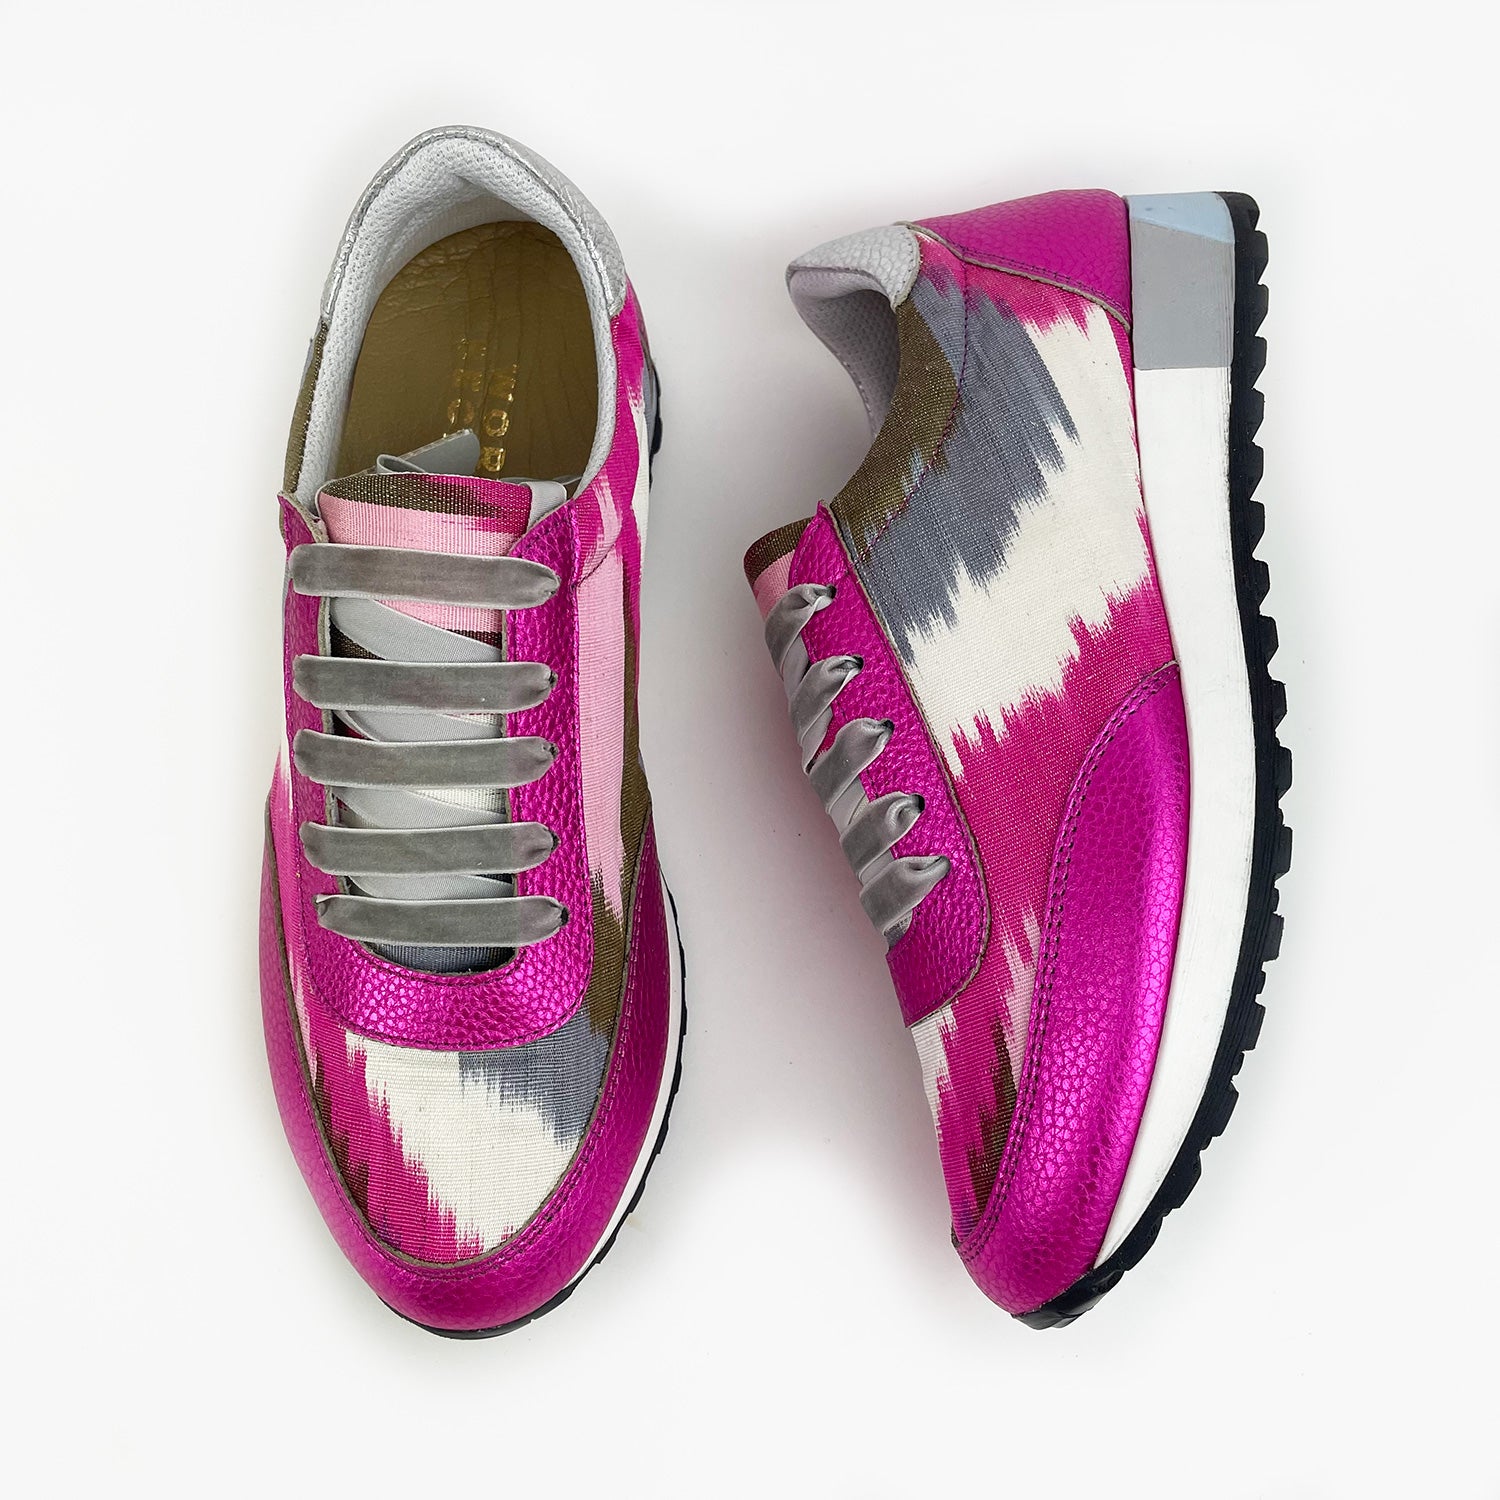 Pink, white, grey and green Ikat Silk trainers with pink metallic leather and grey velvet shoelaces